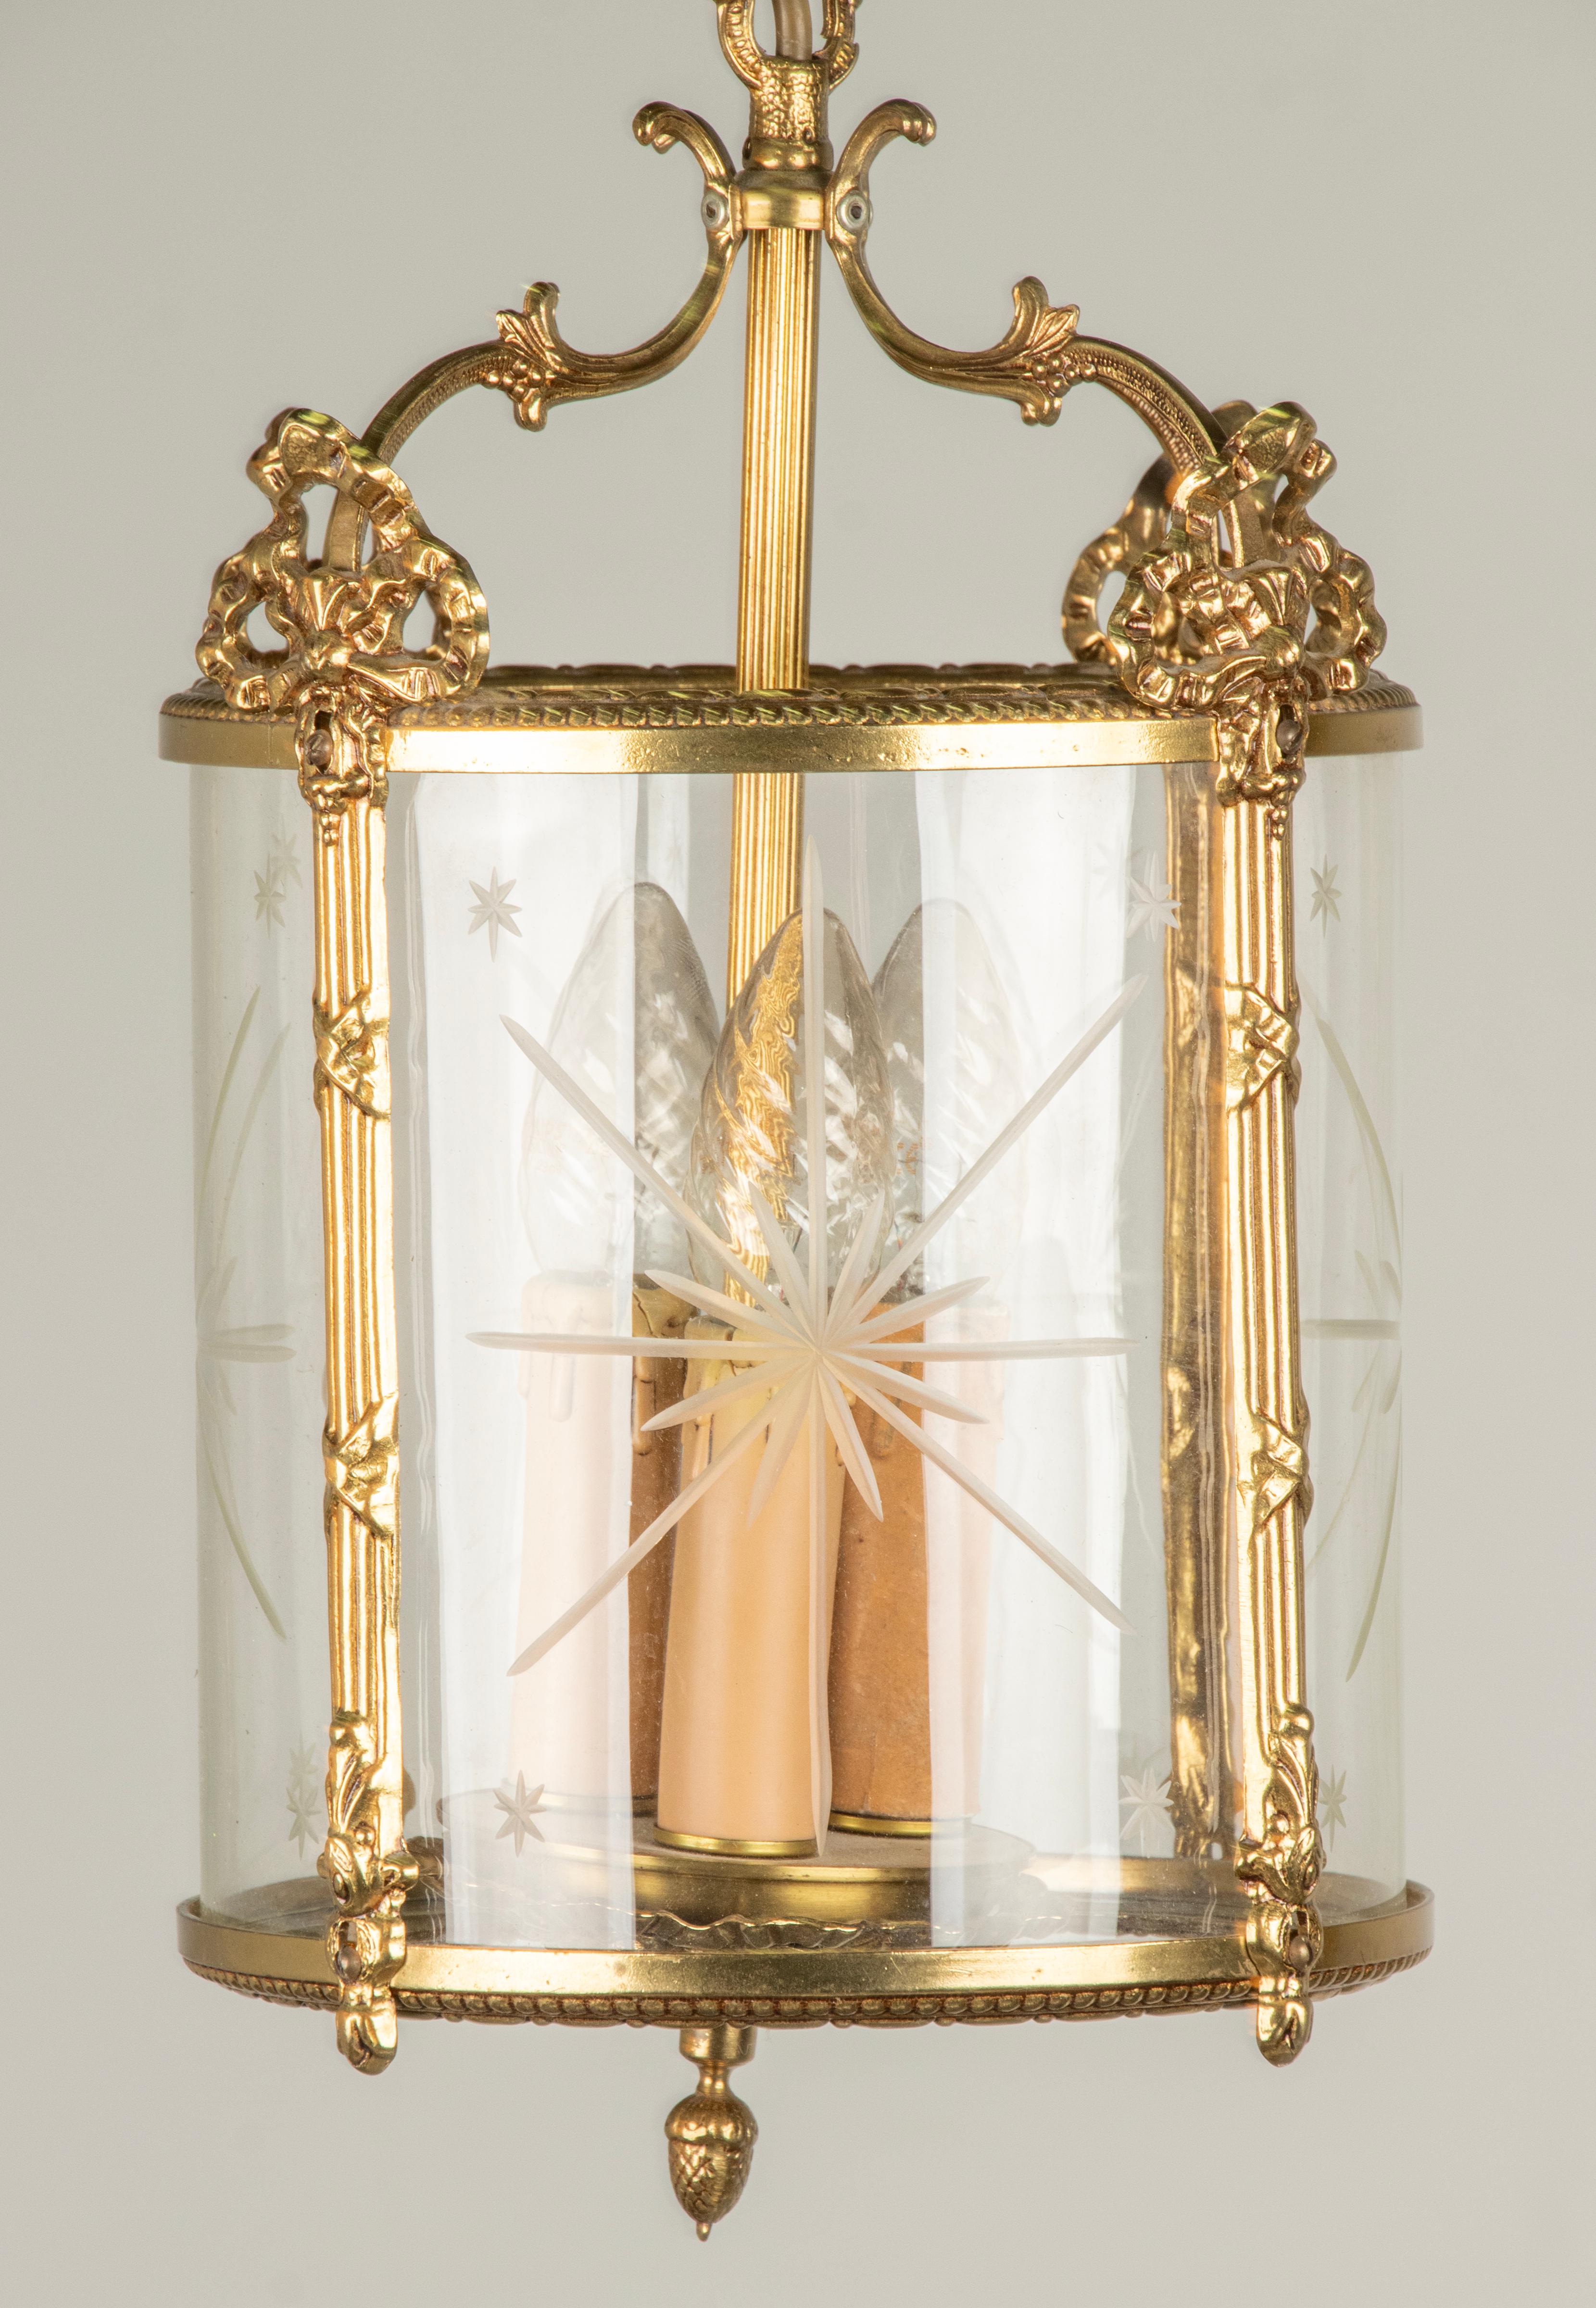 A brass lantern lamp in Louis XVI style. Decorated with with ribbons and bows. Inside a glass shade with cut star pattern. Inside there is space for 3 lamp fittings for E14 lamp bulbs. 
Made in Belgium, circa 1960-1970. 

Dimensions: 51 cm (total